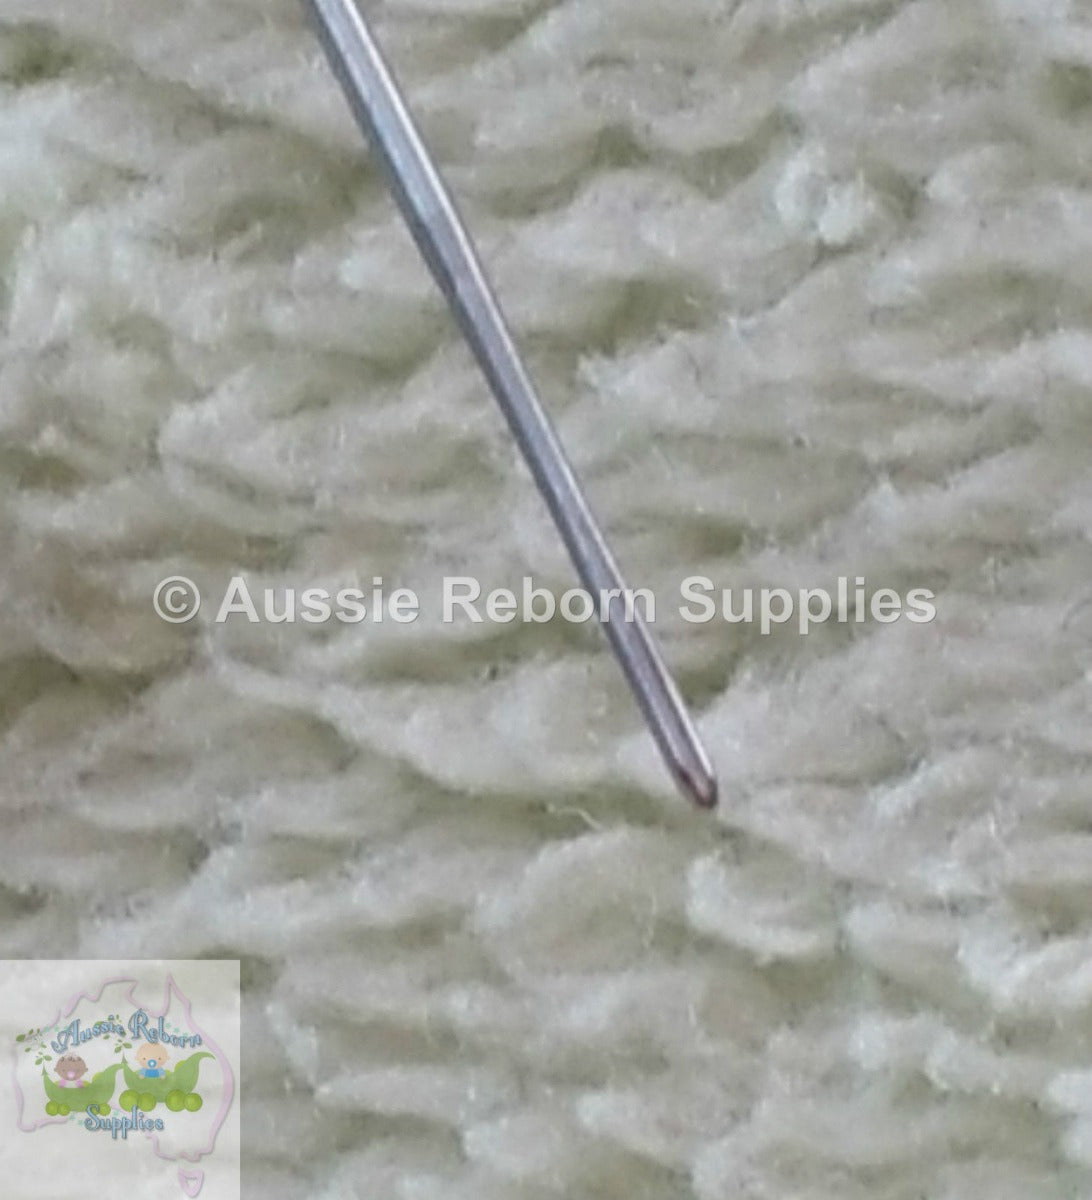 42 Gauge FORKED Rooting Hair Felting Needles Pkt of 10 ADVANCED Reborn Baby